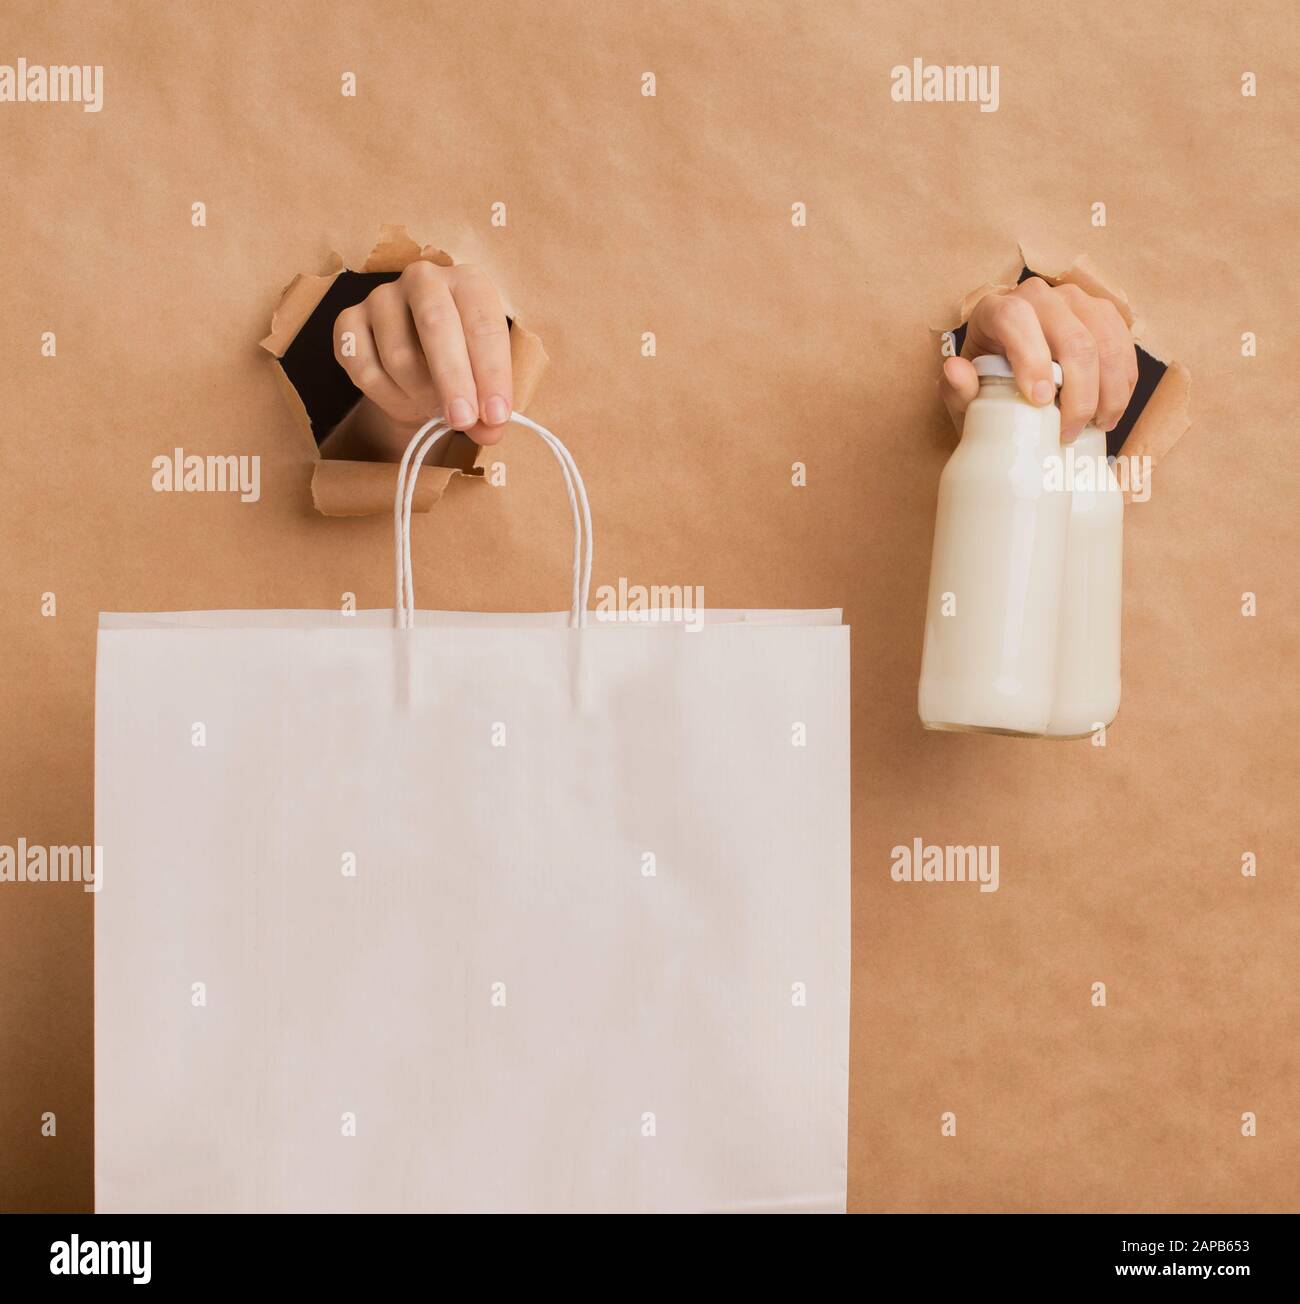 Hands suggesting detox coconut milk and paper bag Stock Photo